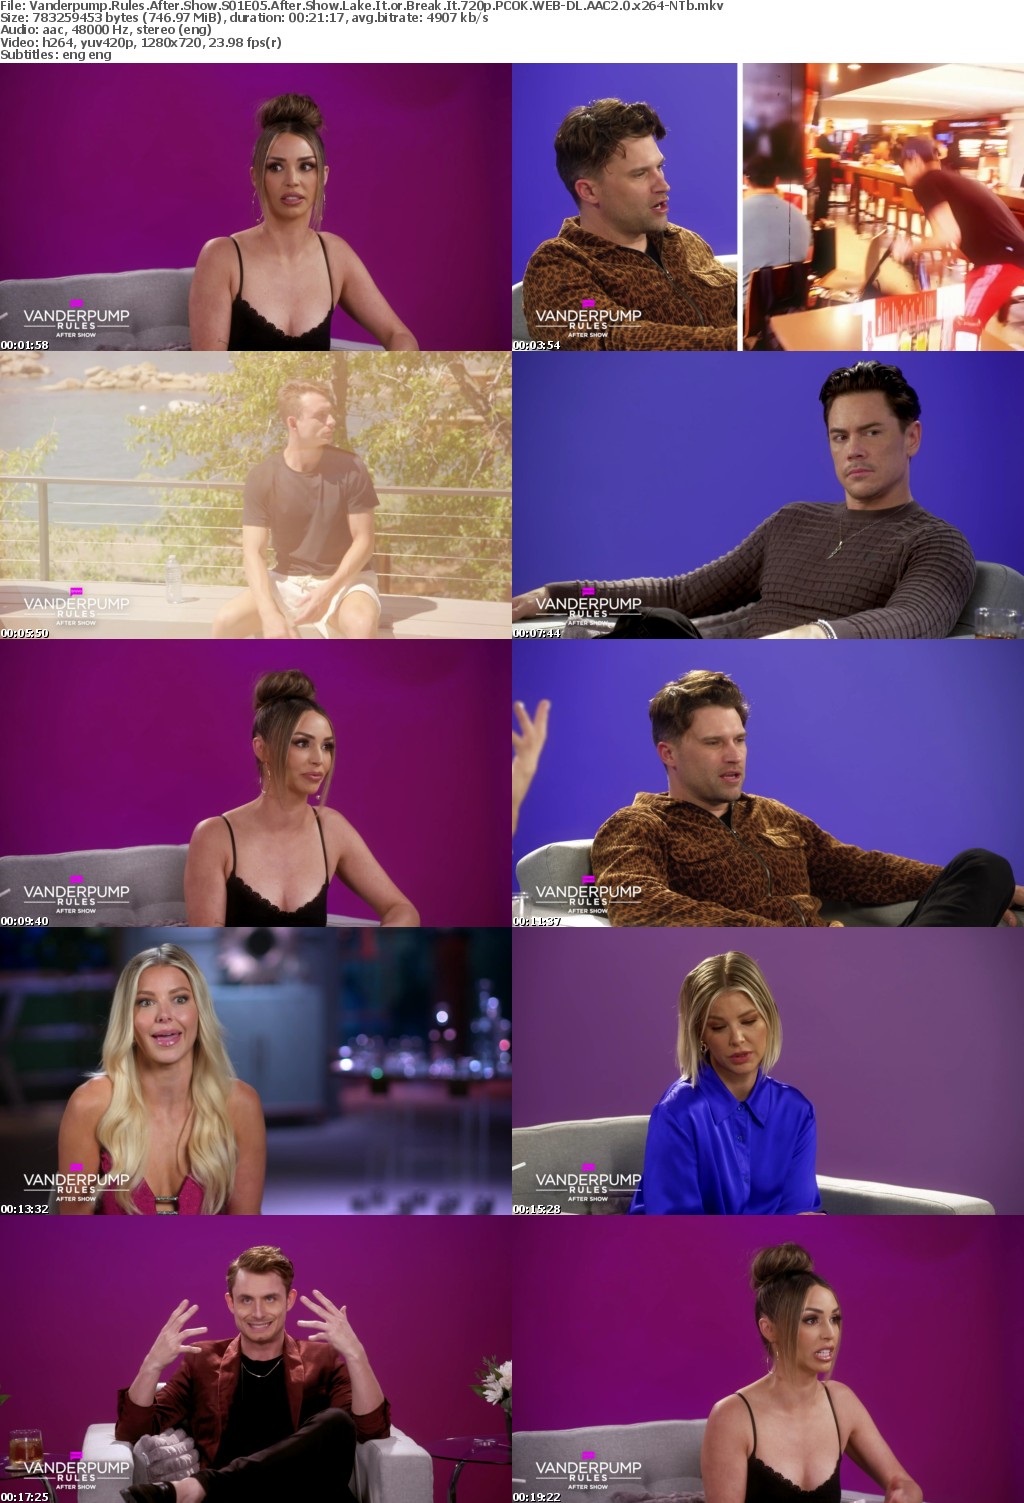 Vanderpump Rules After Show S01E05 After Show Lake It or Break It 720p PCOK WEB-DL AAC2 0 x264-NTb